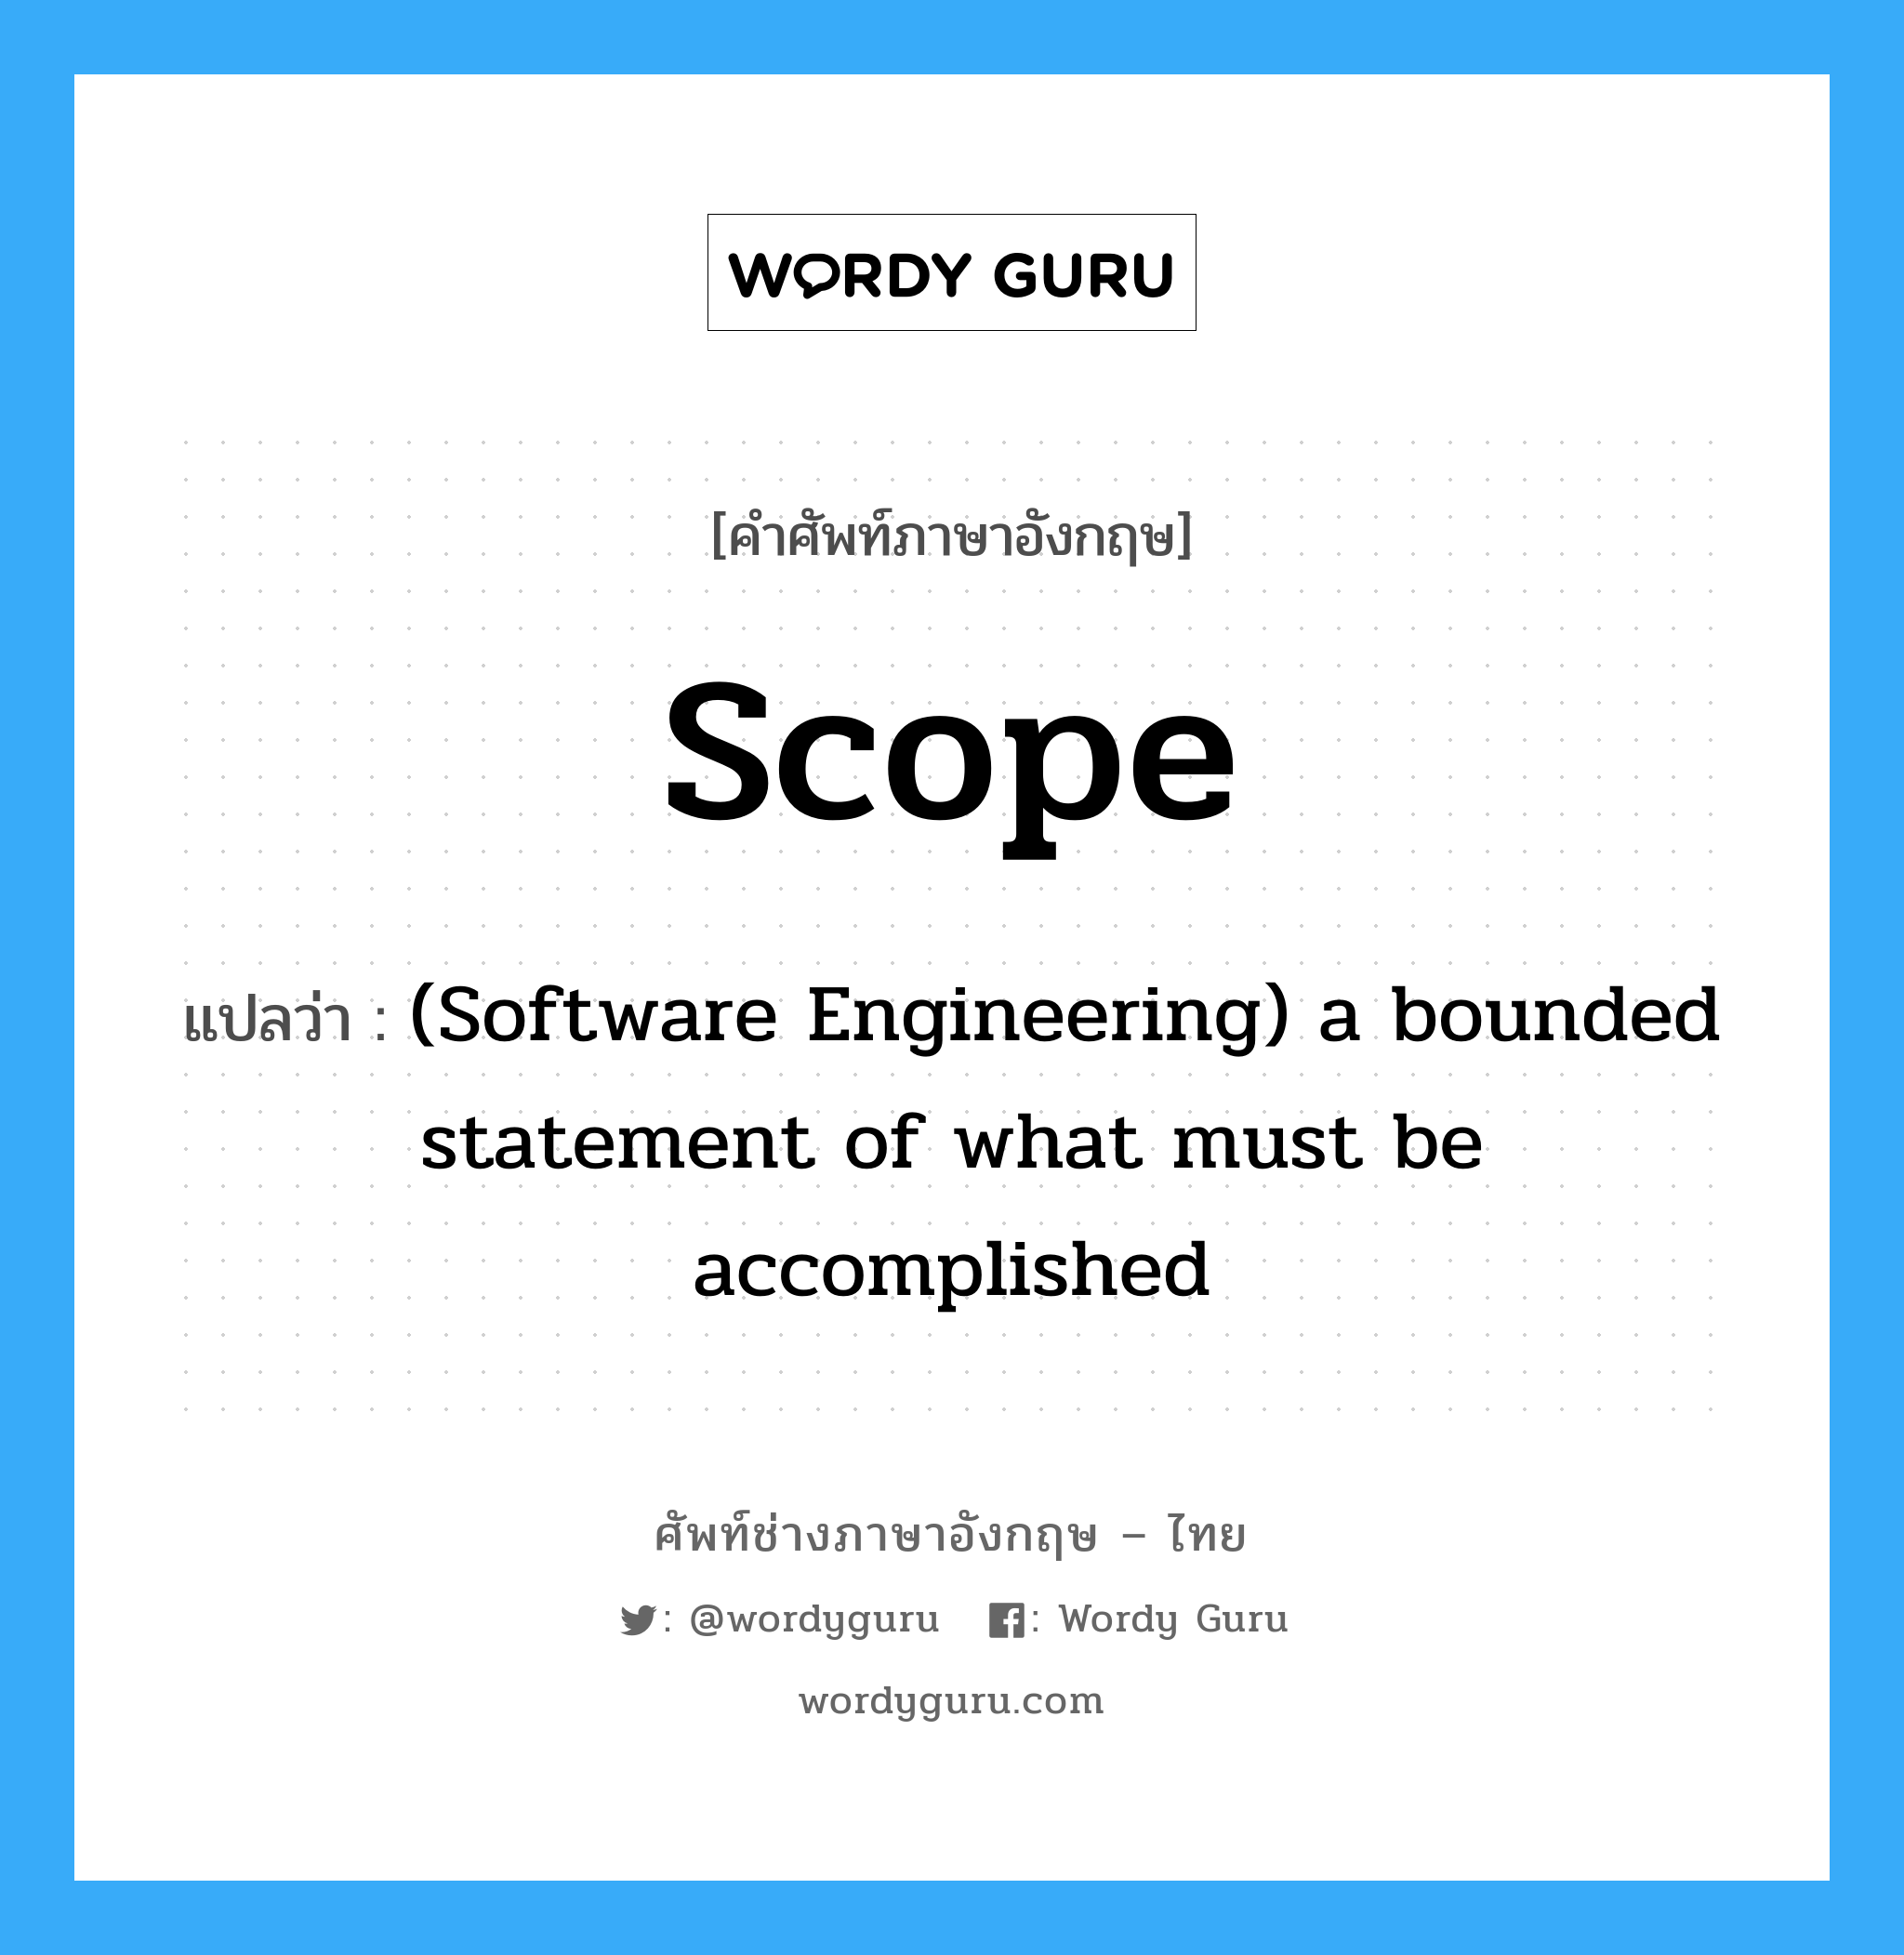 Scope แปลว่า?, คำศัพท์ช่างภาษาอังกฤษ - ไทย Scope คำศัพท์ภาษาอังกฤษ Scope แปลว่า (Software Engineering) a bounded statement of what must be accomplished